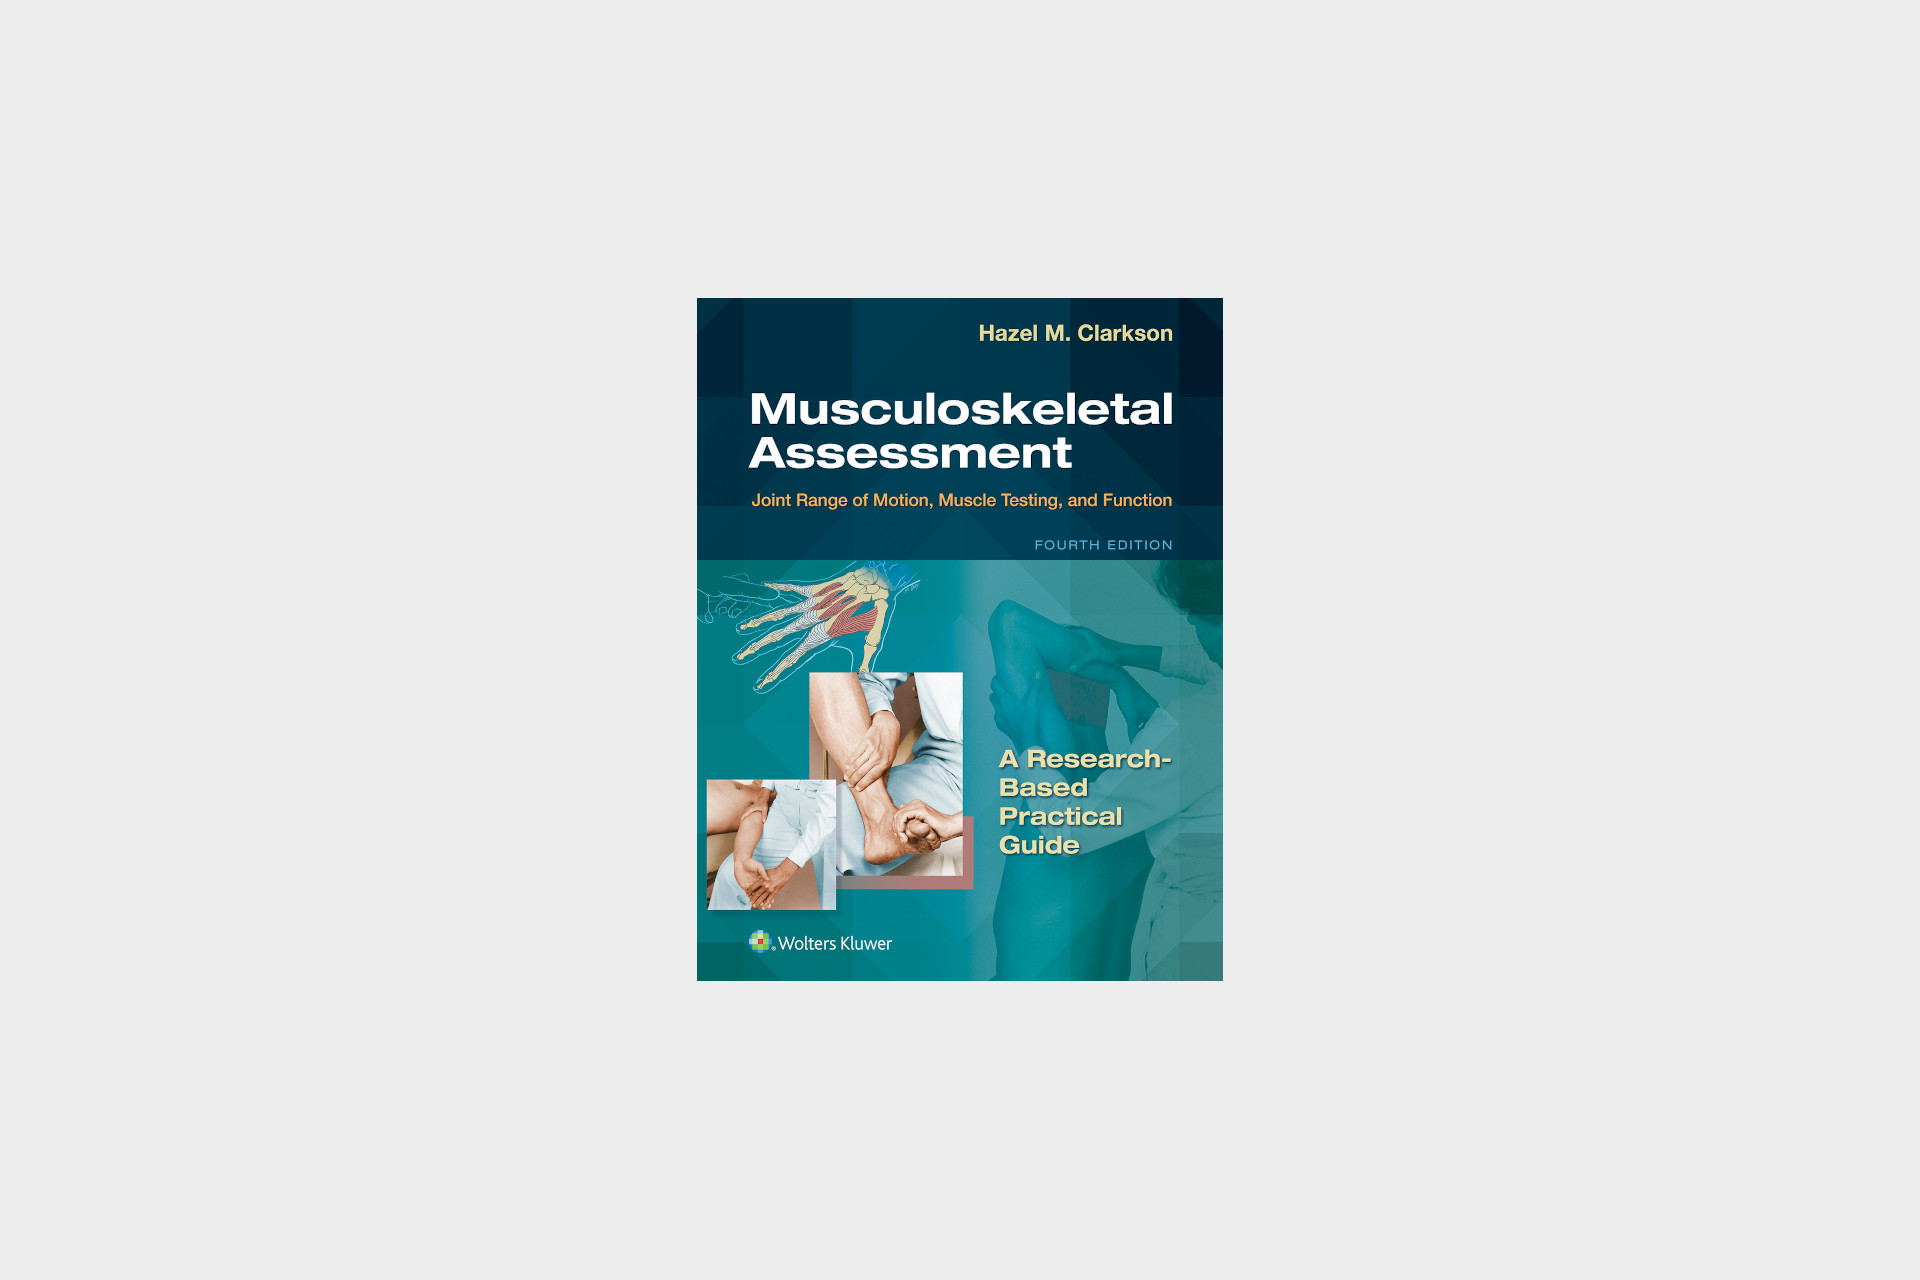 Musculoskeletal Assessment: Joint Range of Motion, Muscle Testing, and Function book cover